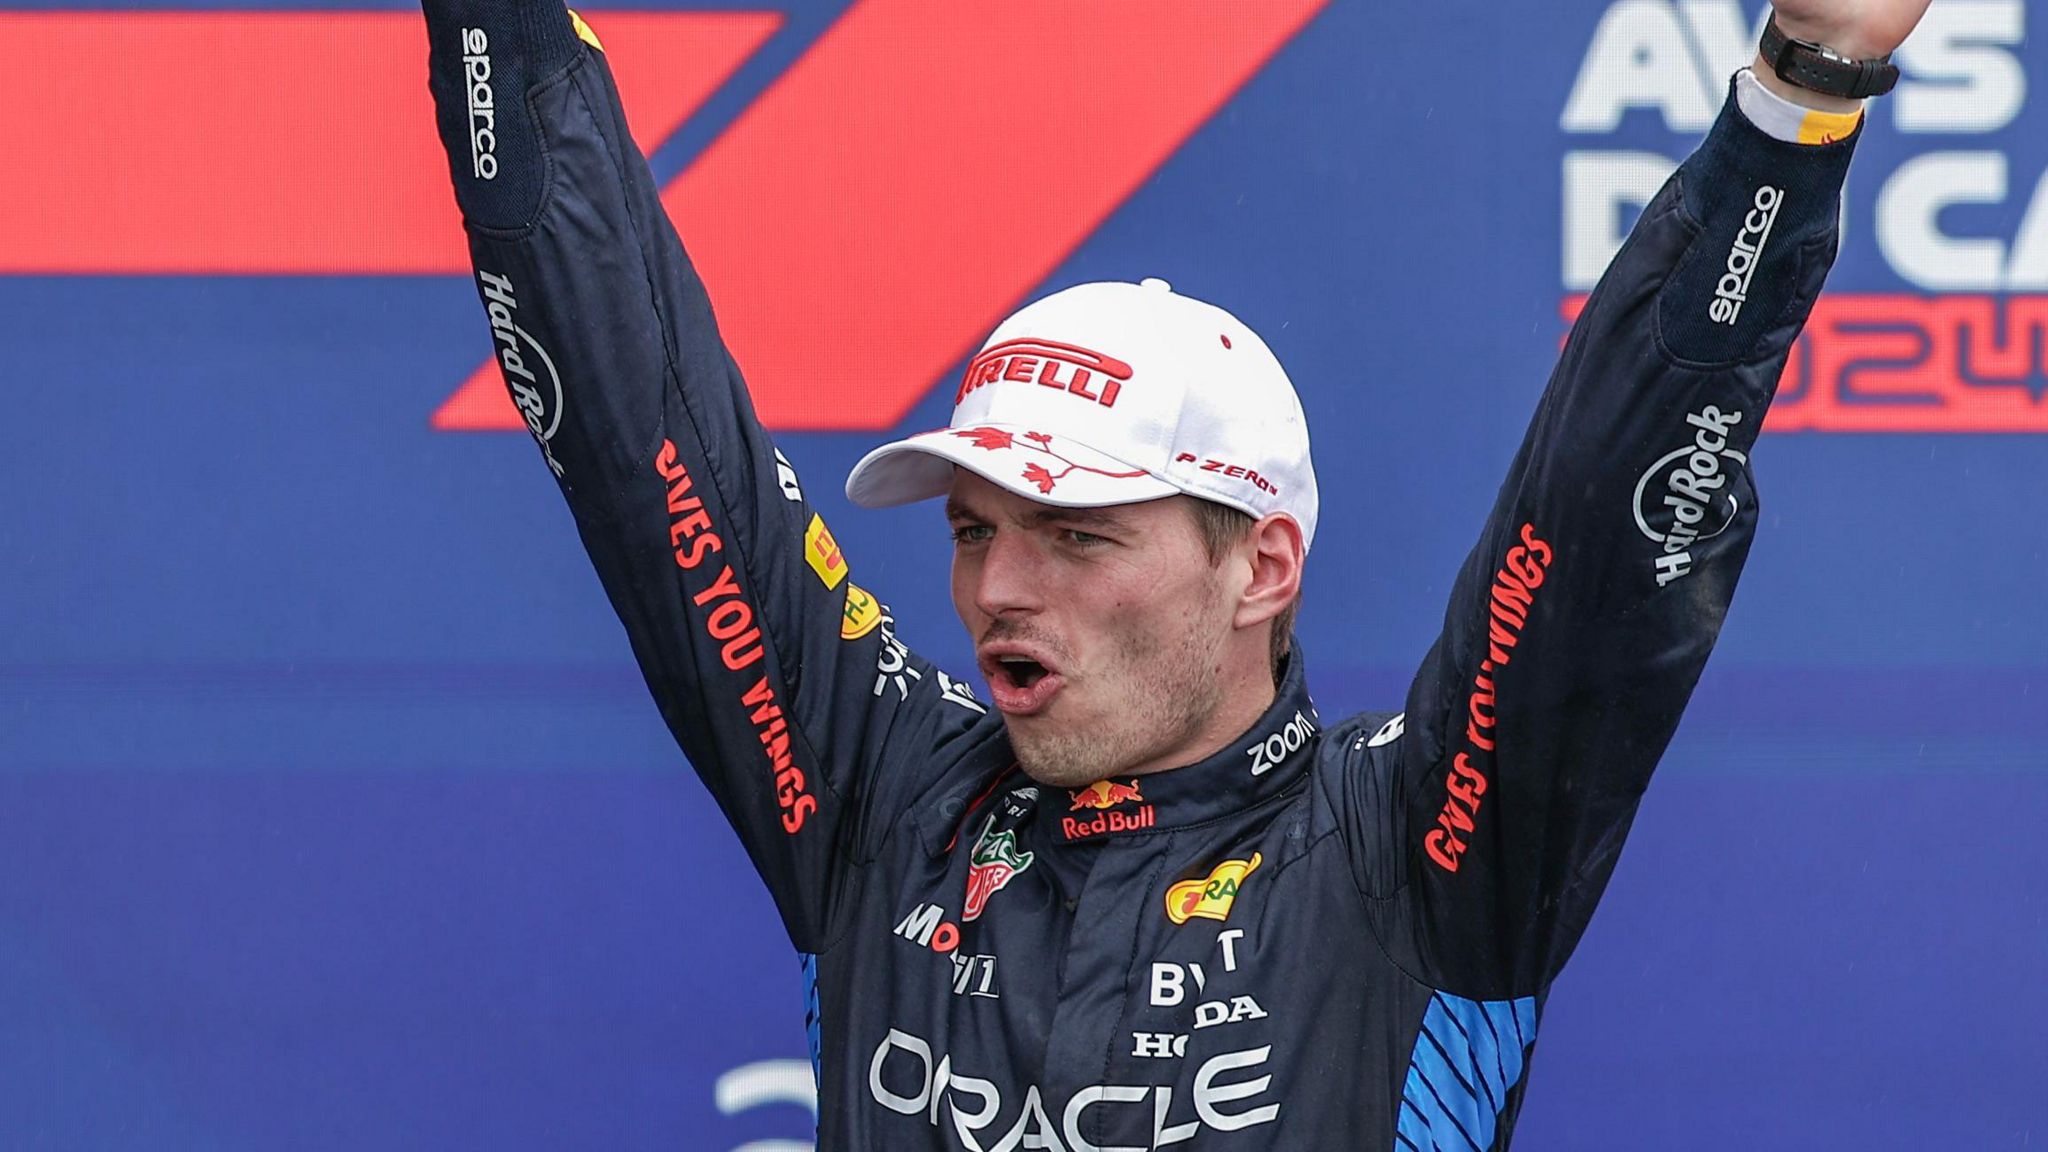 Max Verstappen Clinches Win in Unpredictable Race at Canadian GP